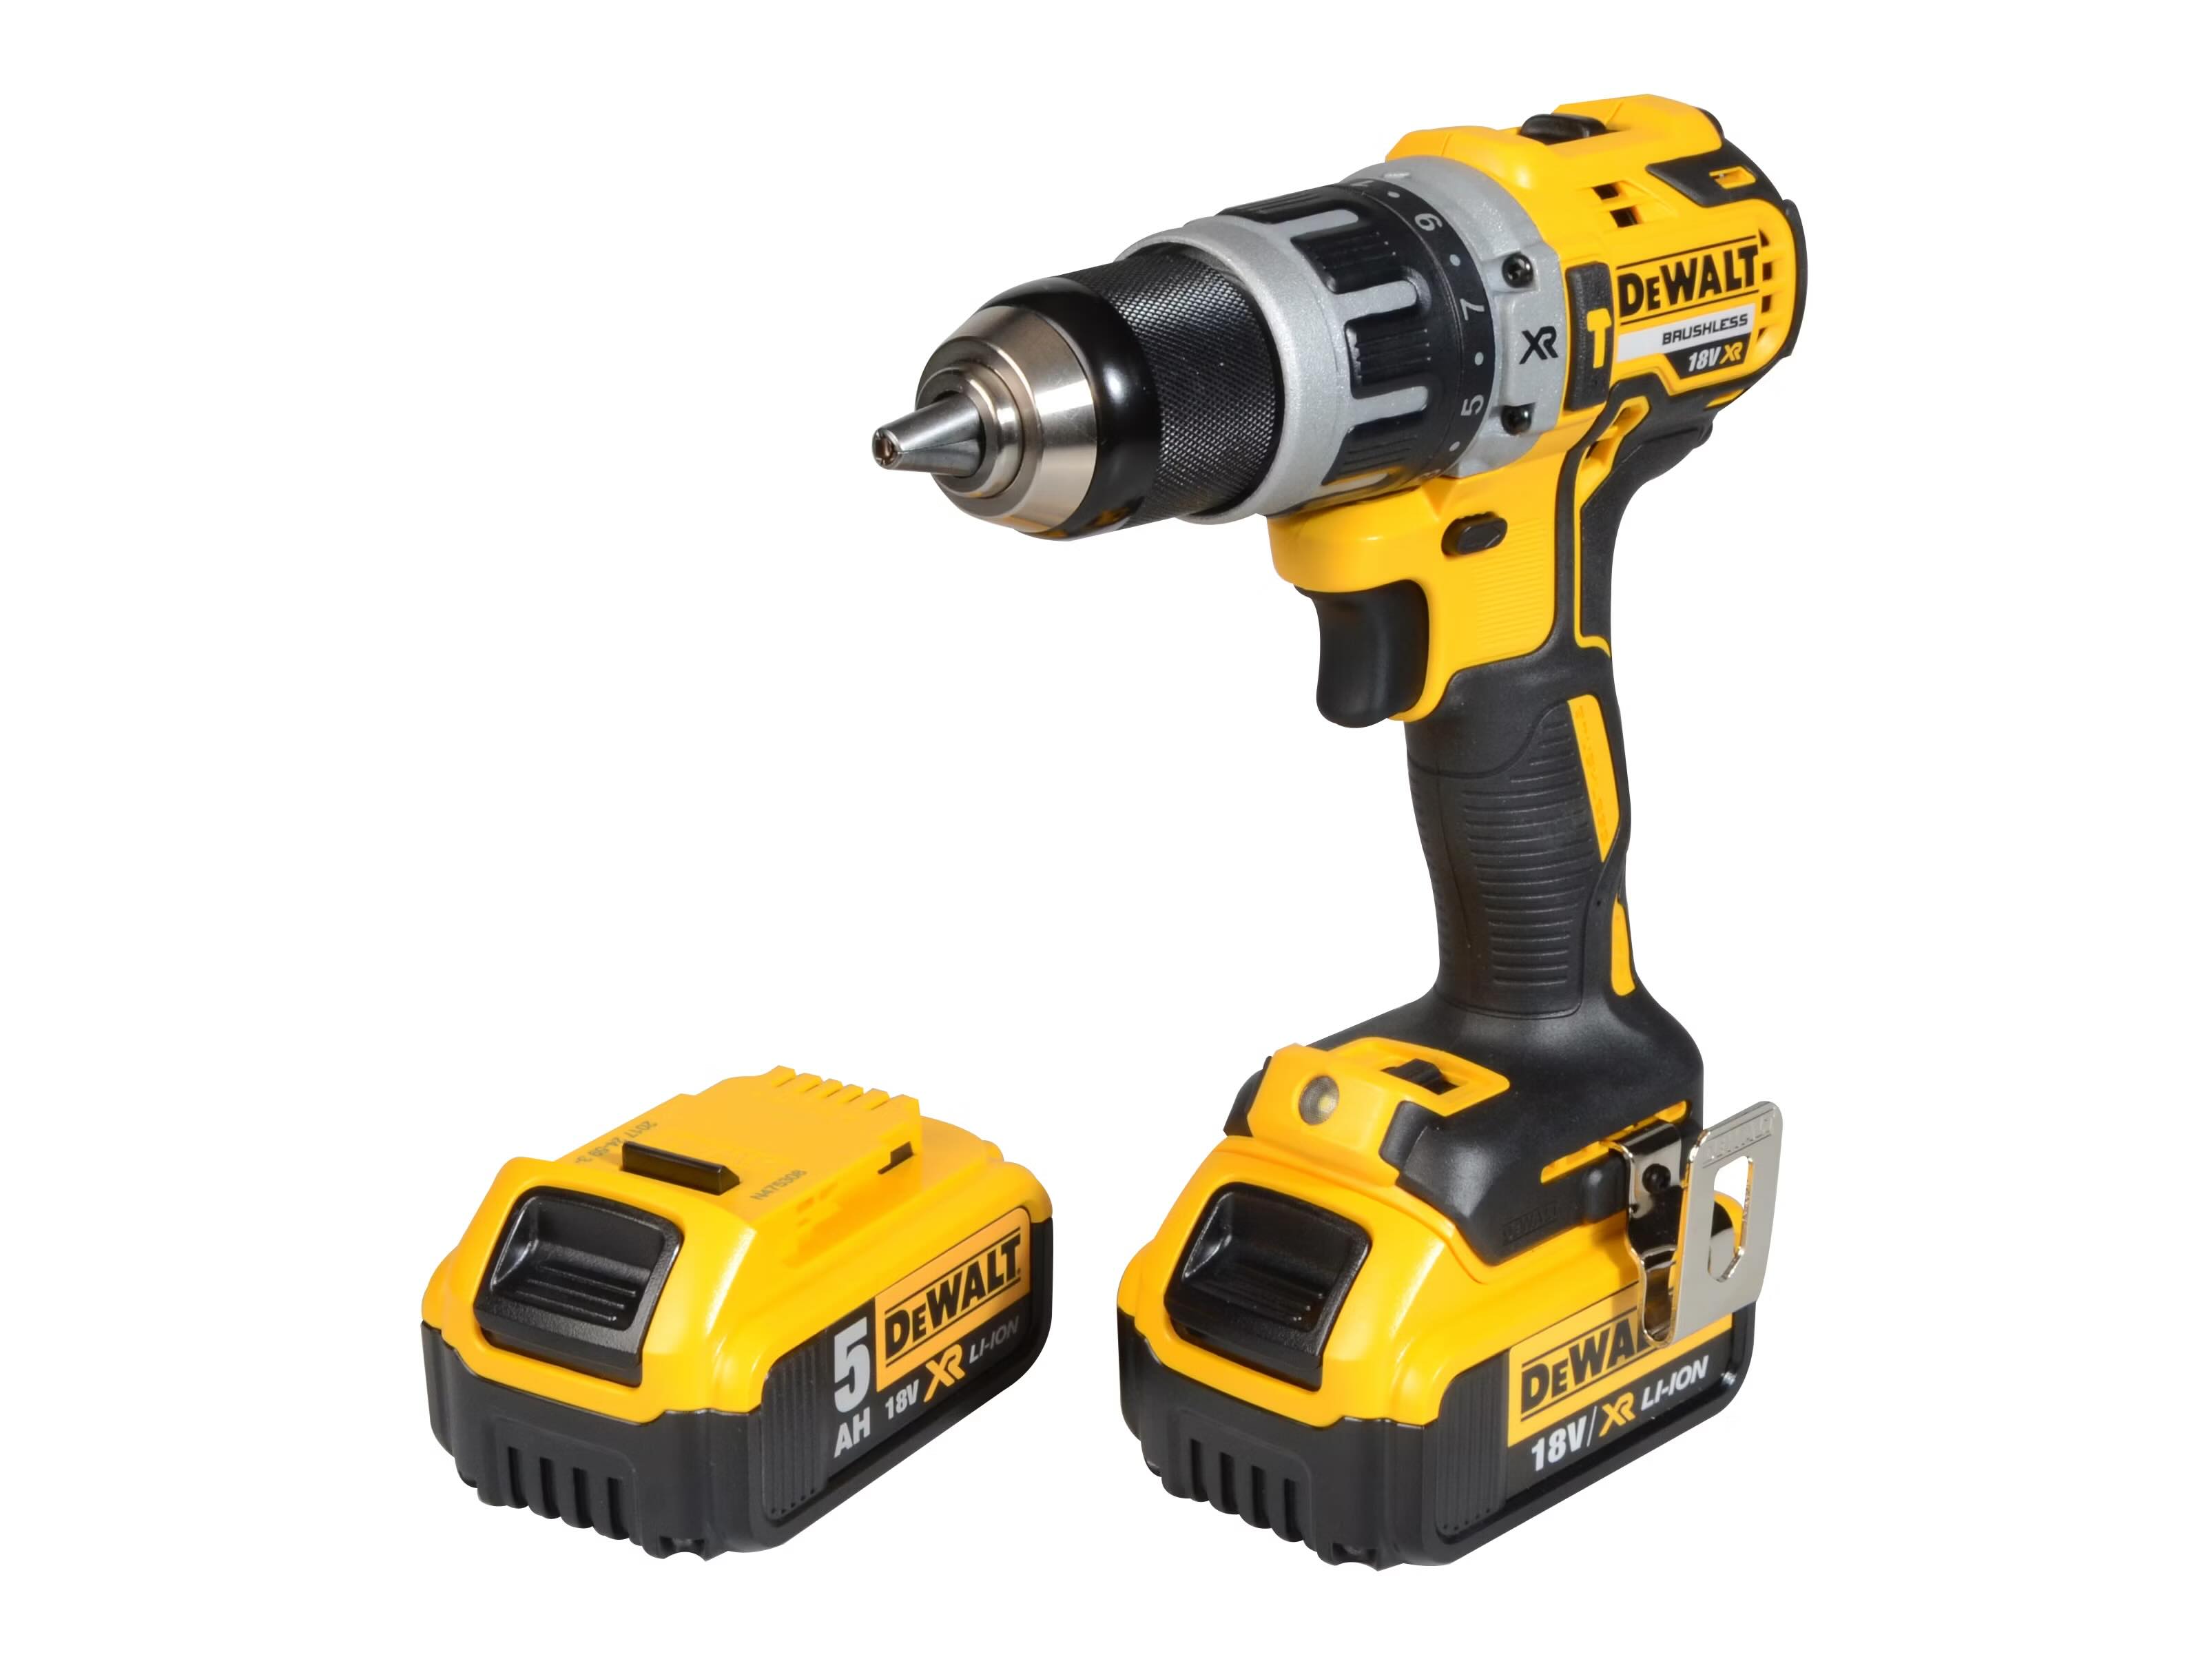 Cordless Drill Review: The Best Tools for Your DIY Projects